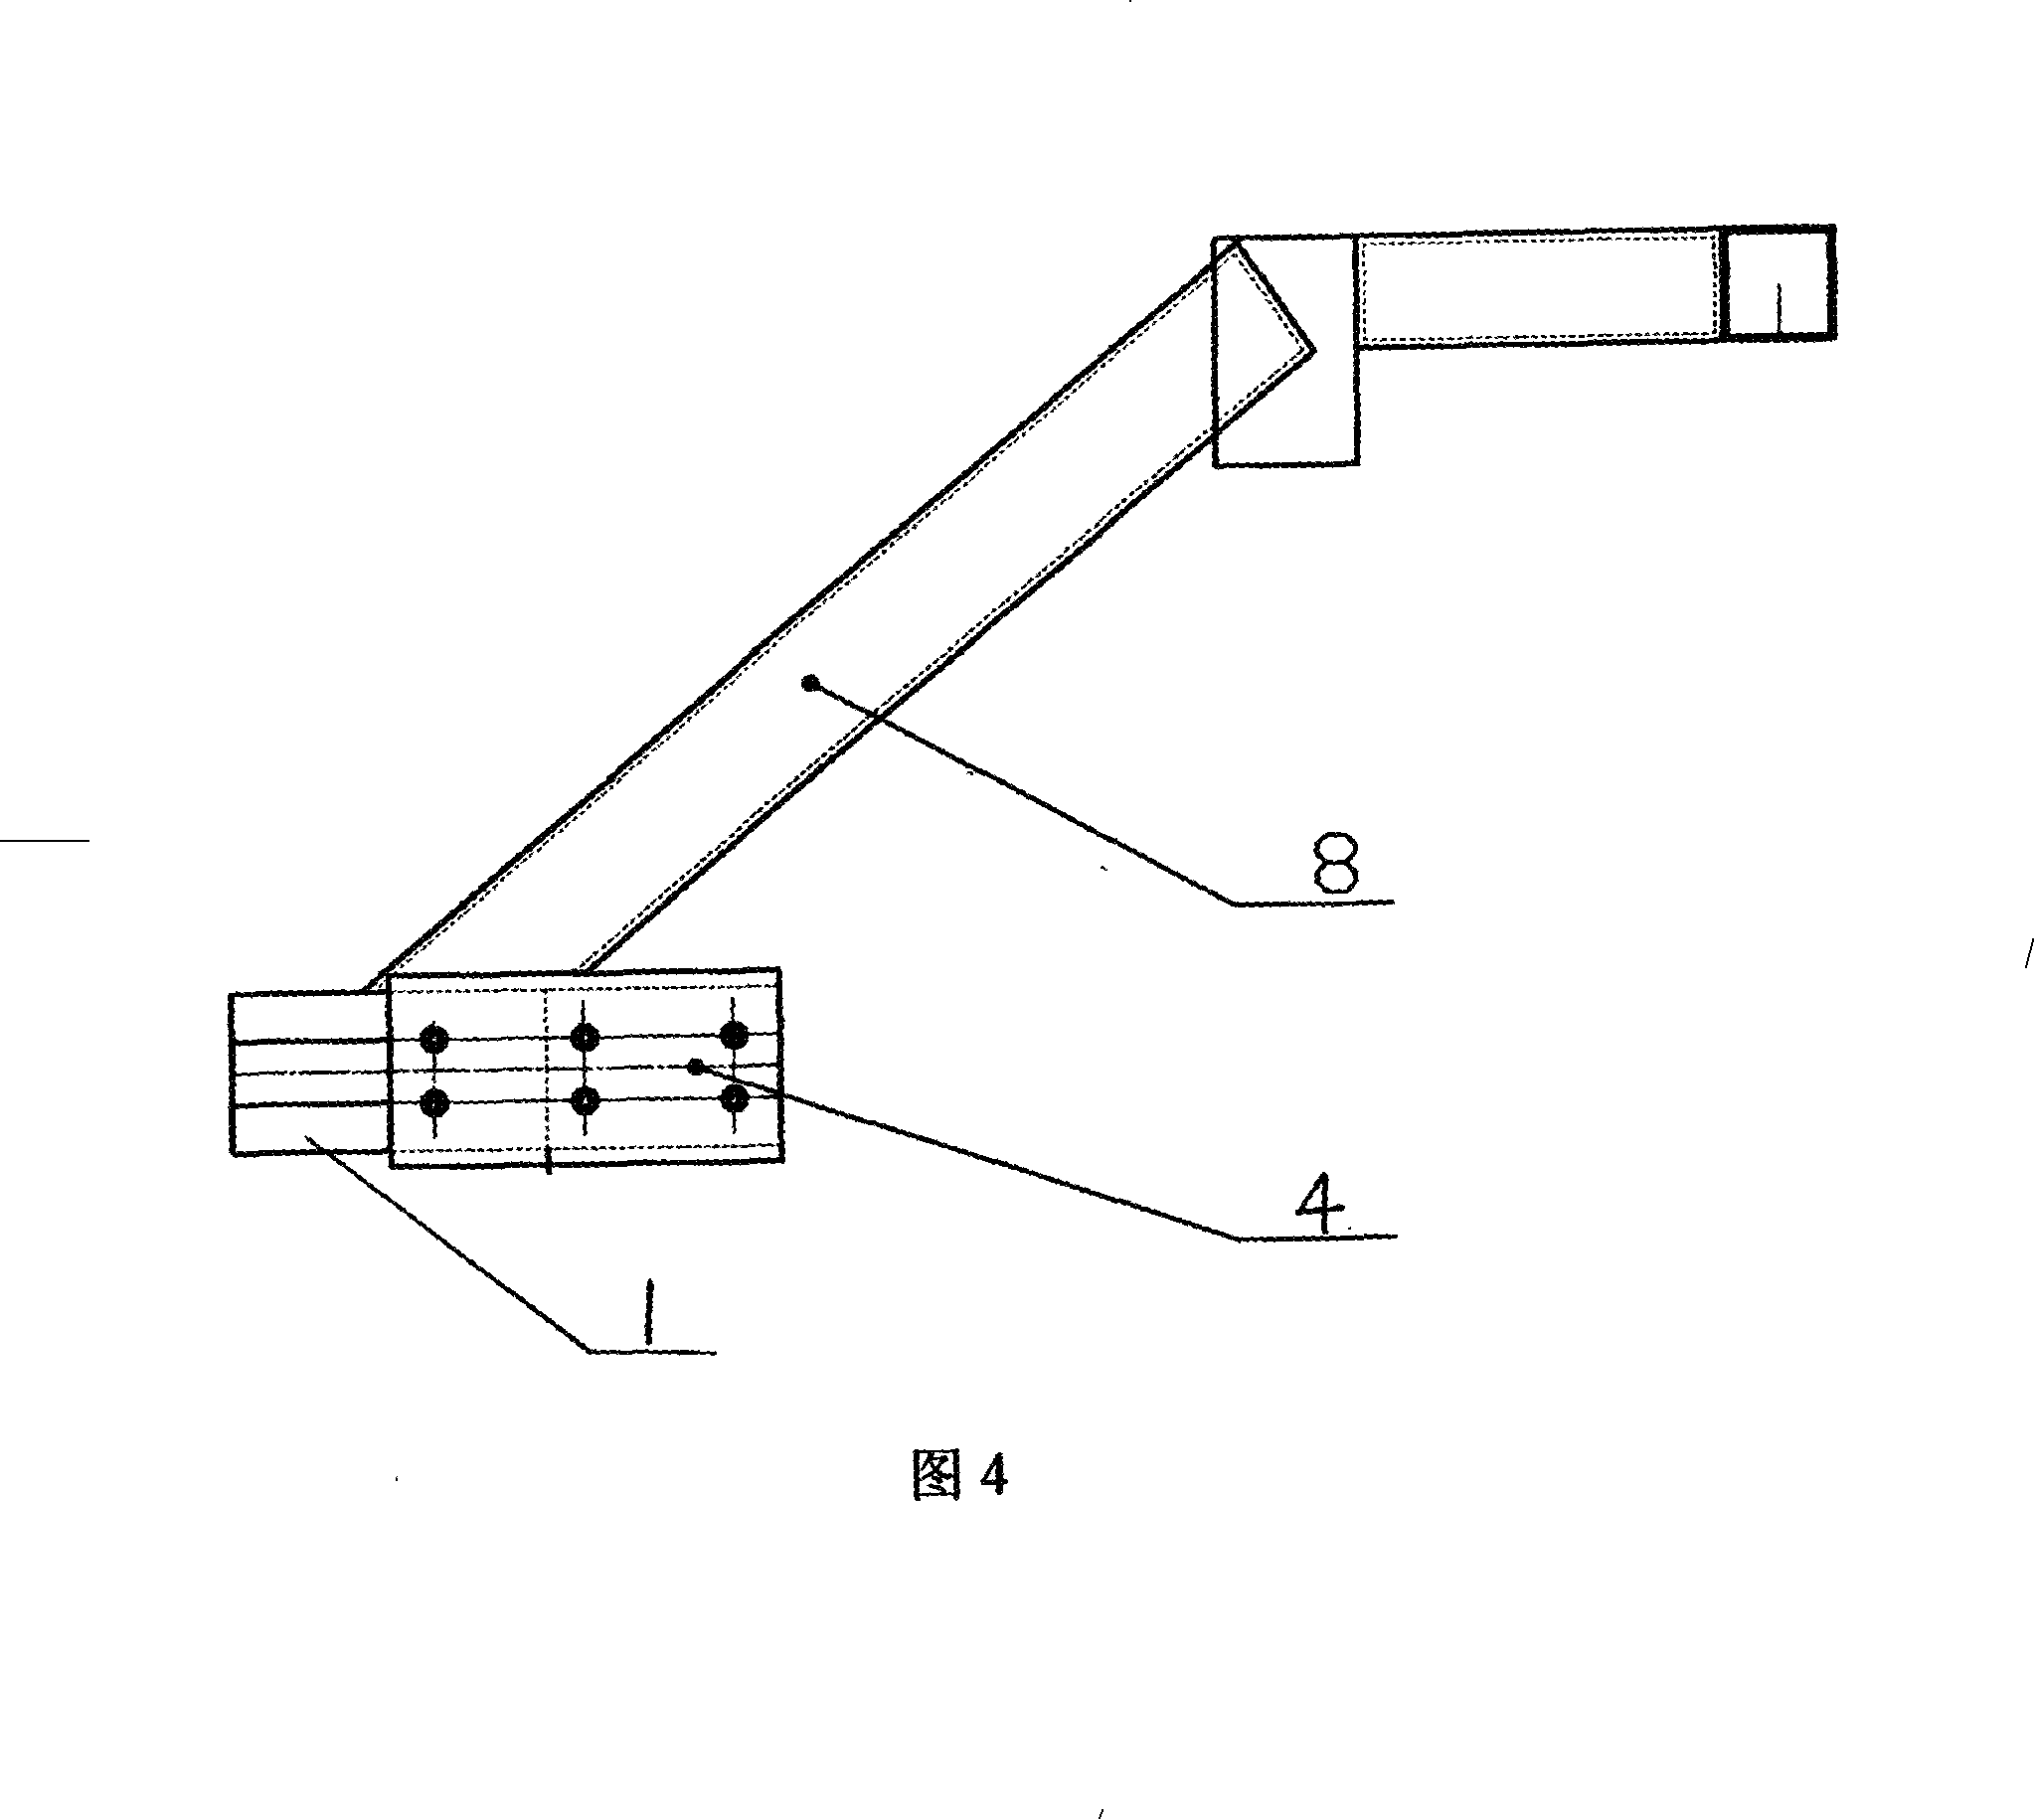 Holding tool shared quick changing support of the vehicle final assembly conveying system